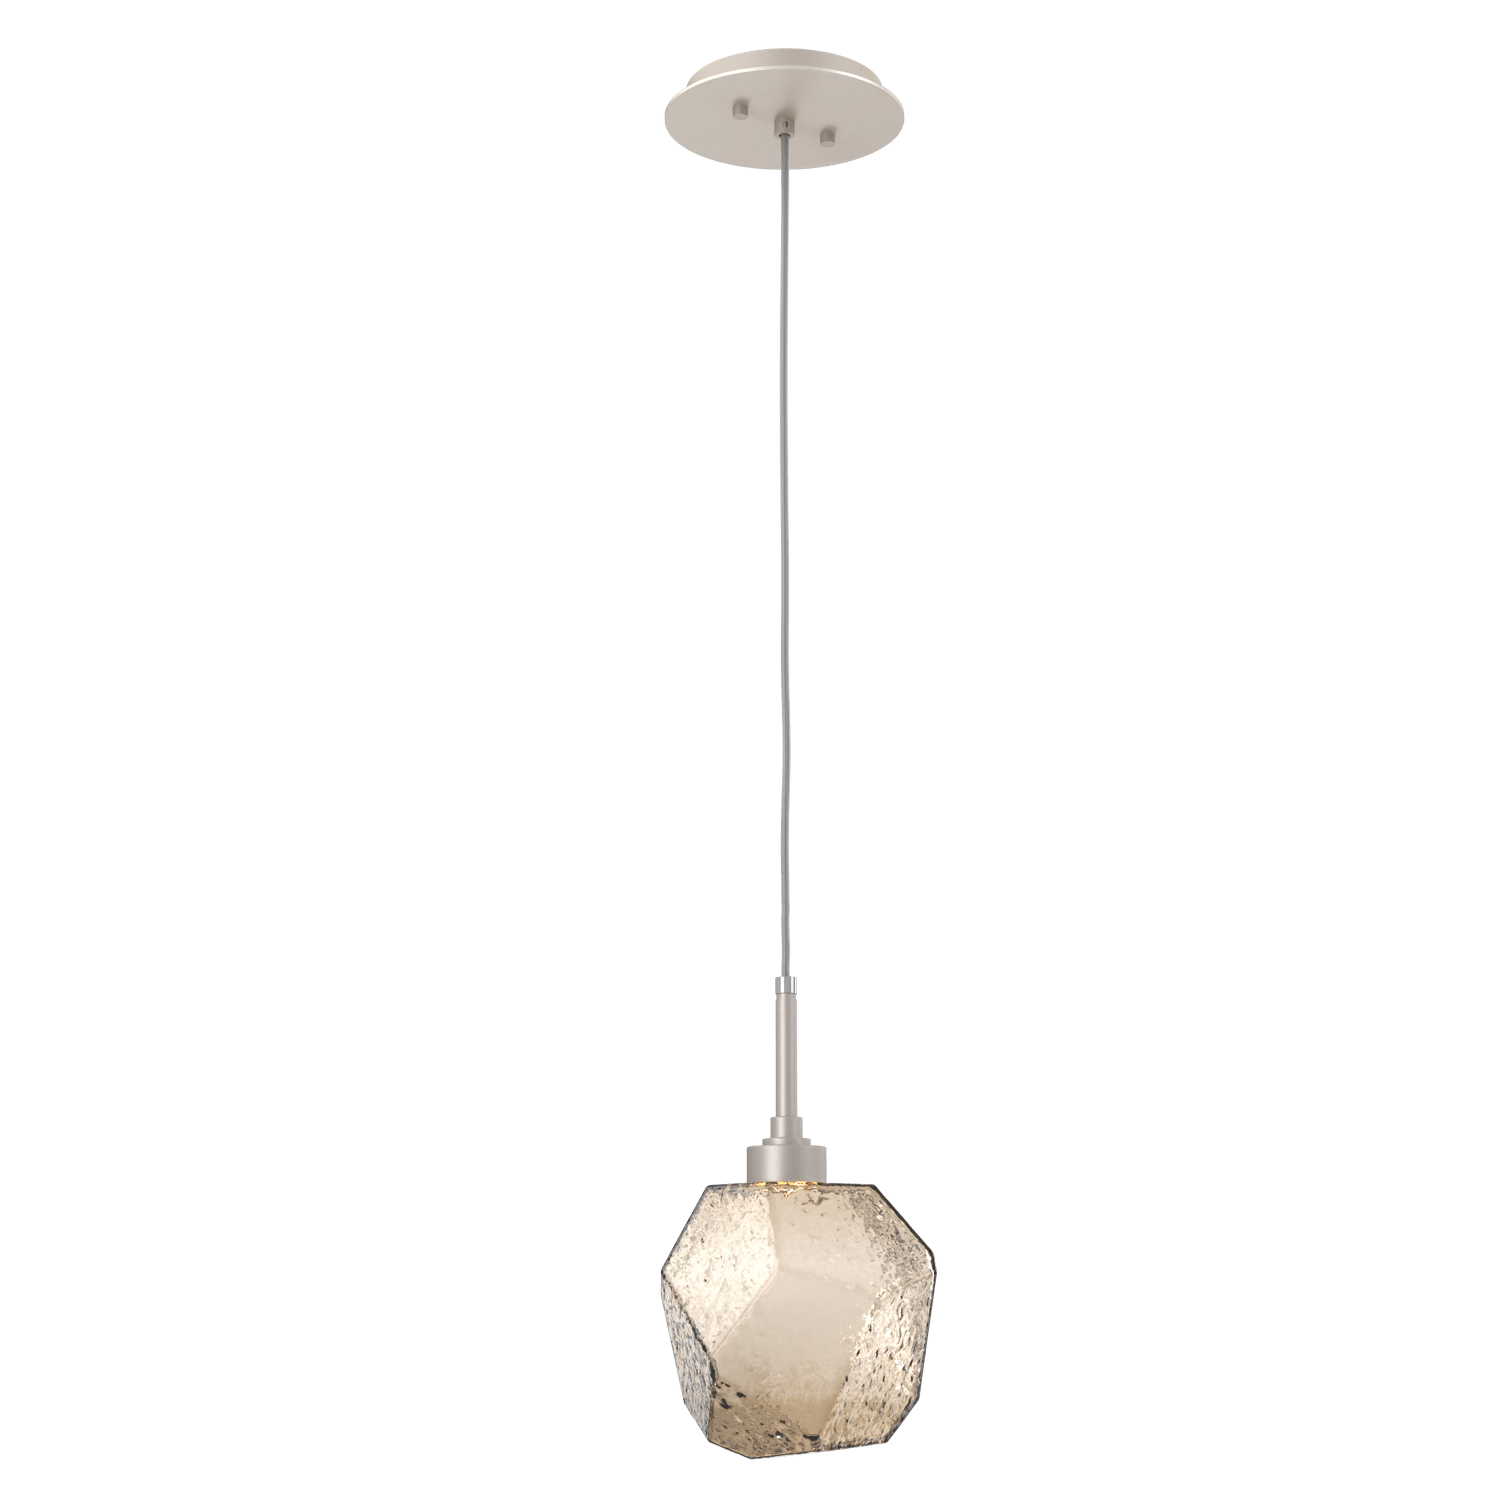 LAB0039-01-BS-B-Hammerton-Studio-Gem-pendant-light-with-metallic-beige-silver-finish-and-bronze-blown-glass-shades-and-LED-lamping